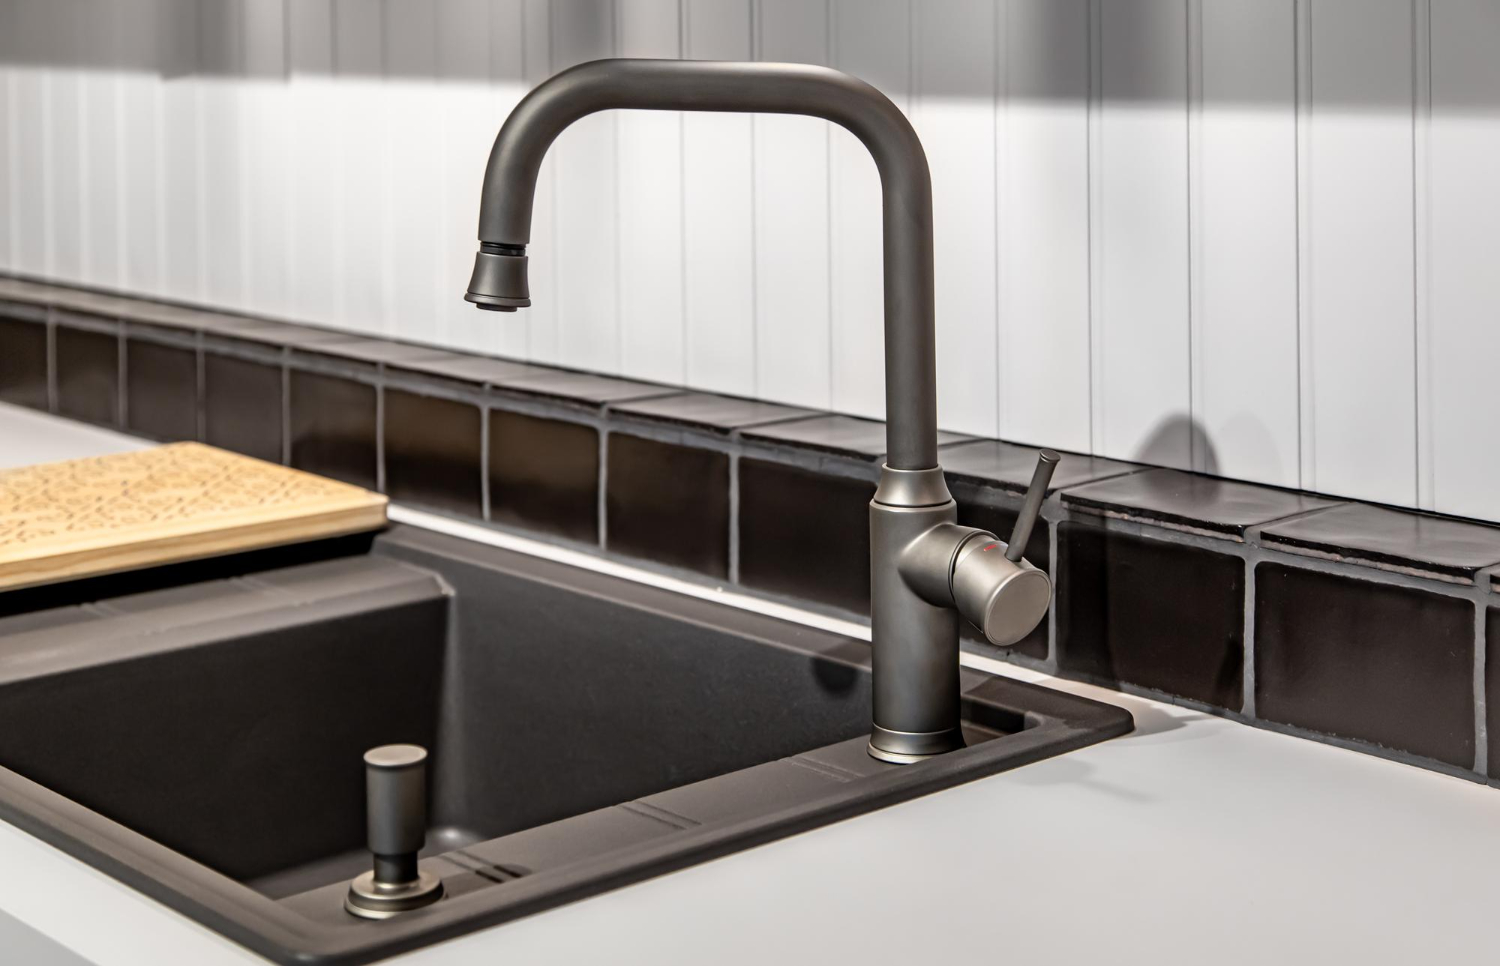 Defining Elegance & Efficiency in Your Home with CaBano – Your Trusted Partner for Plumbing and Kitchen Fixtures